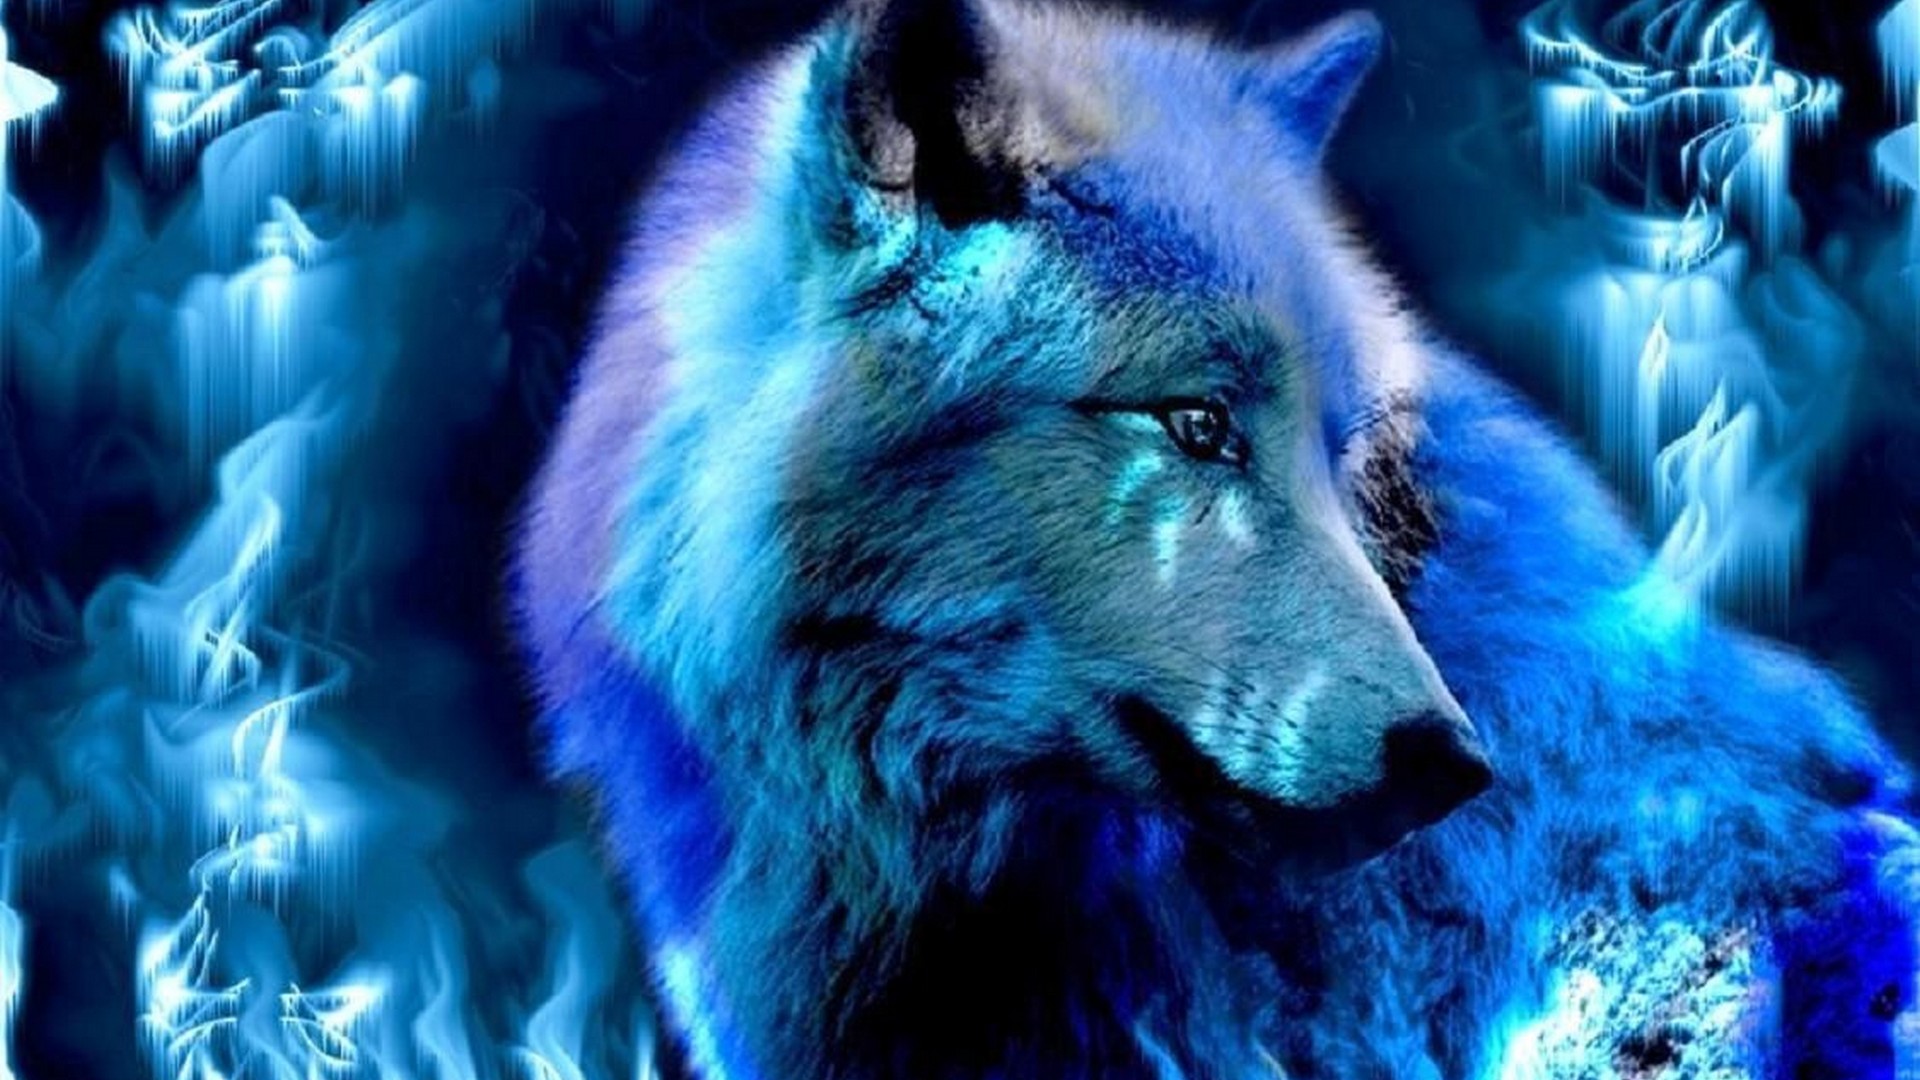 Cool Wolf Wallpaper For Desktop with high-resolution 1920x1080 pixel. You can use this wallpaper for your Windows and Mac OS computers as well as your Android and iPhone smartphones